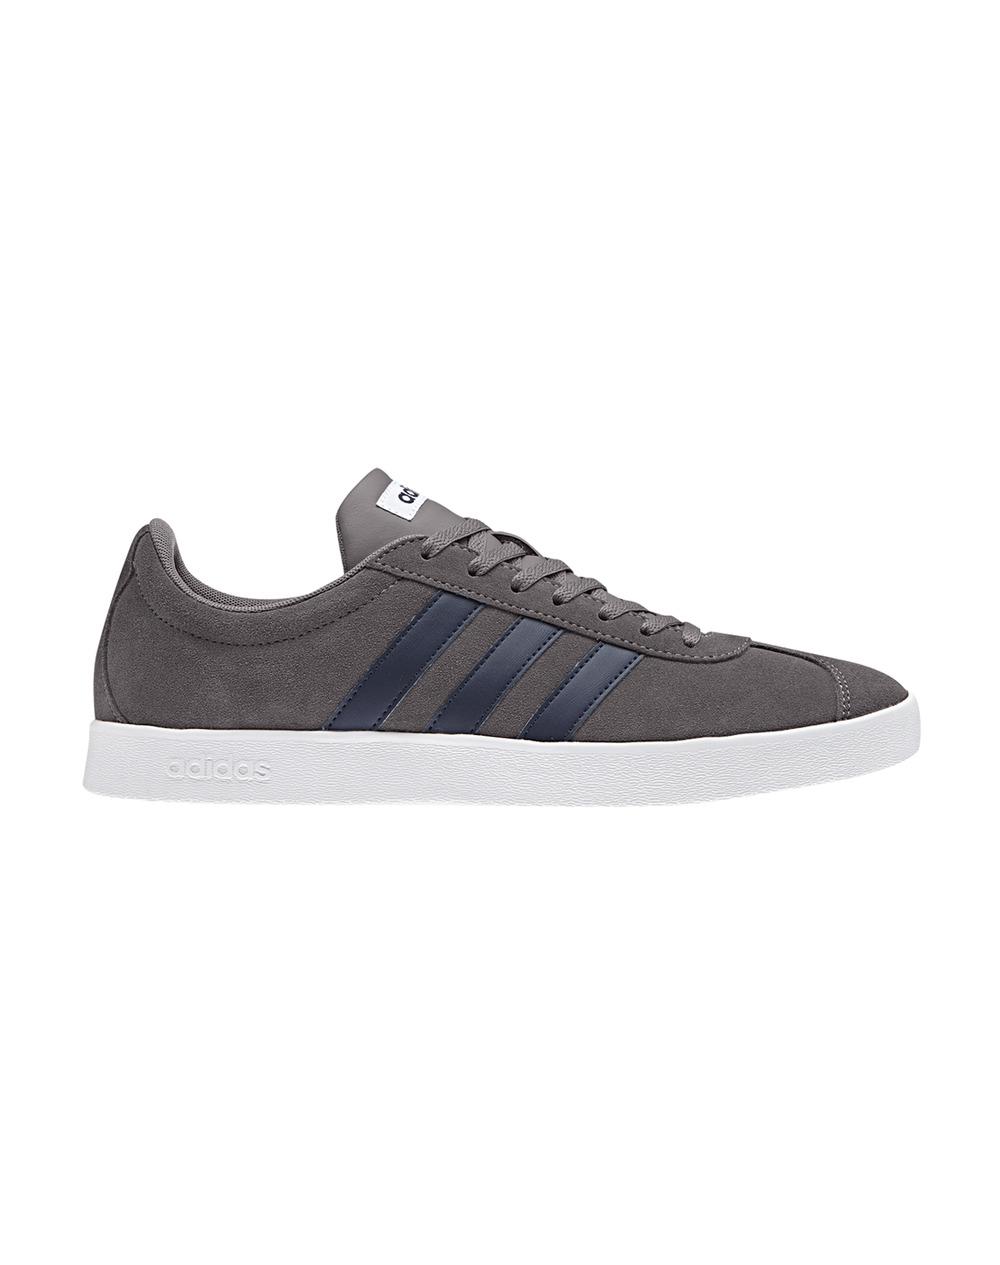 Adidas Neo El Corte Ingles Online Store, UP TO 68% OFF |  www.realliganaval.com